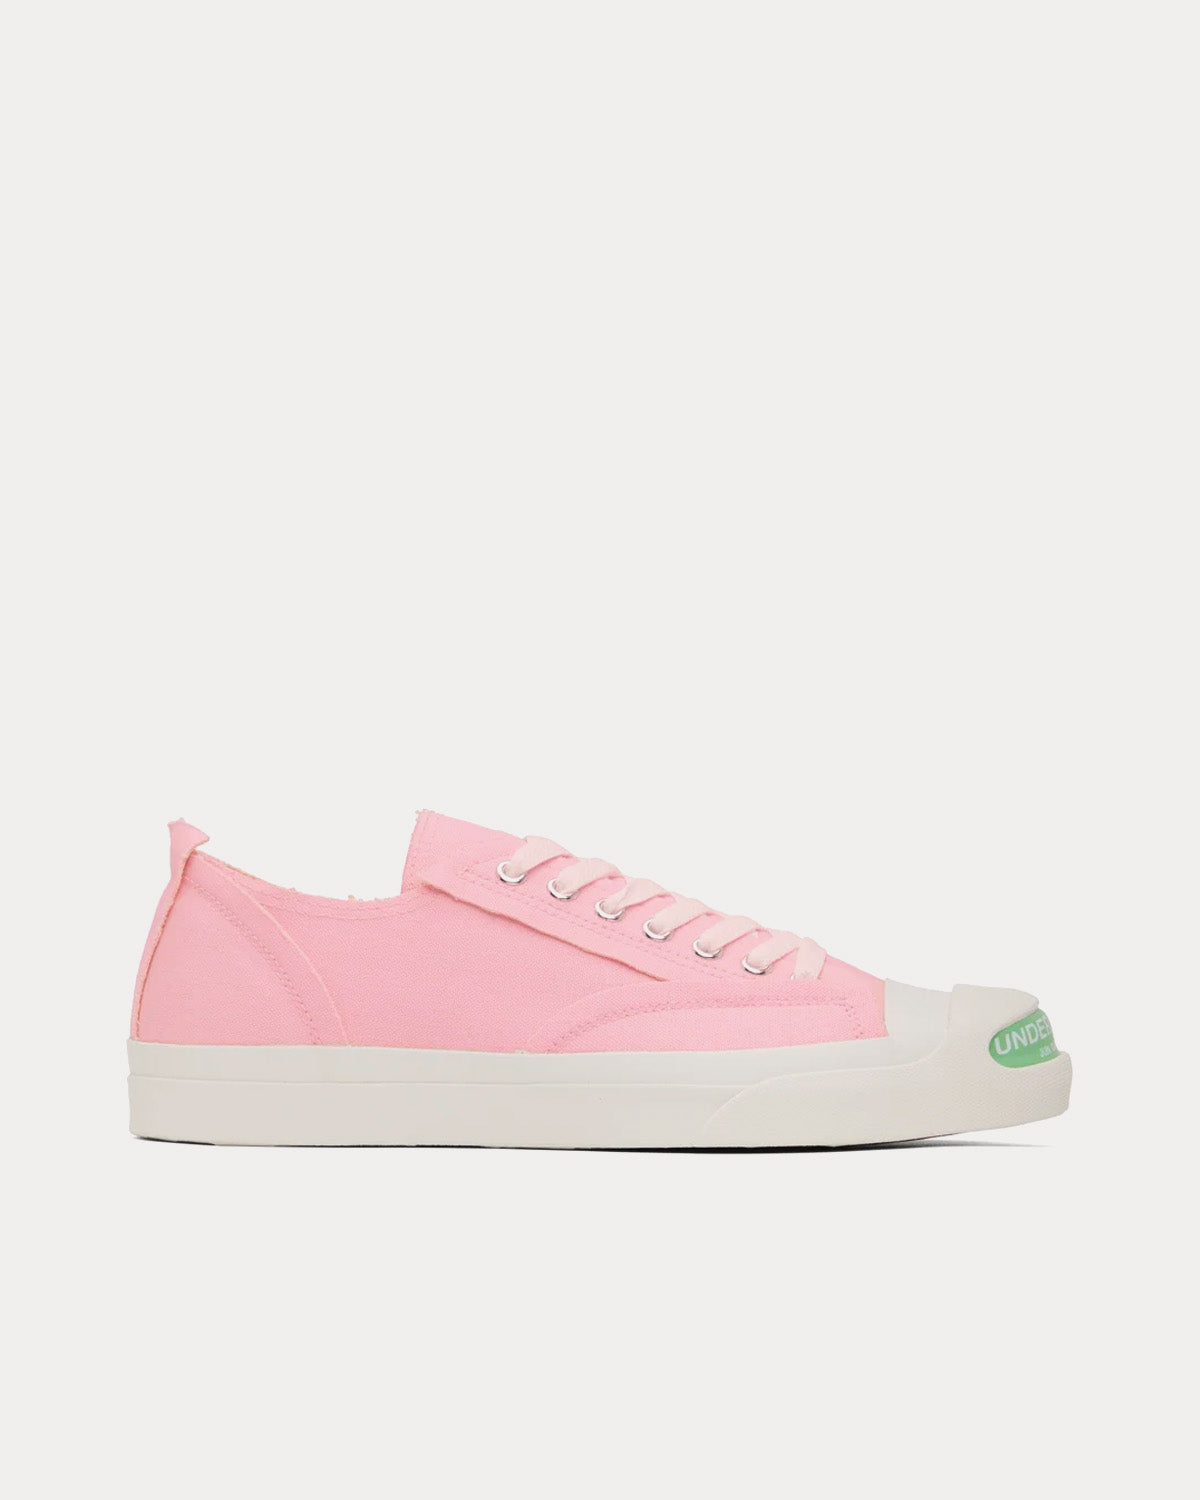 Undercover - Canvas Pink Low Top Sneakers